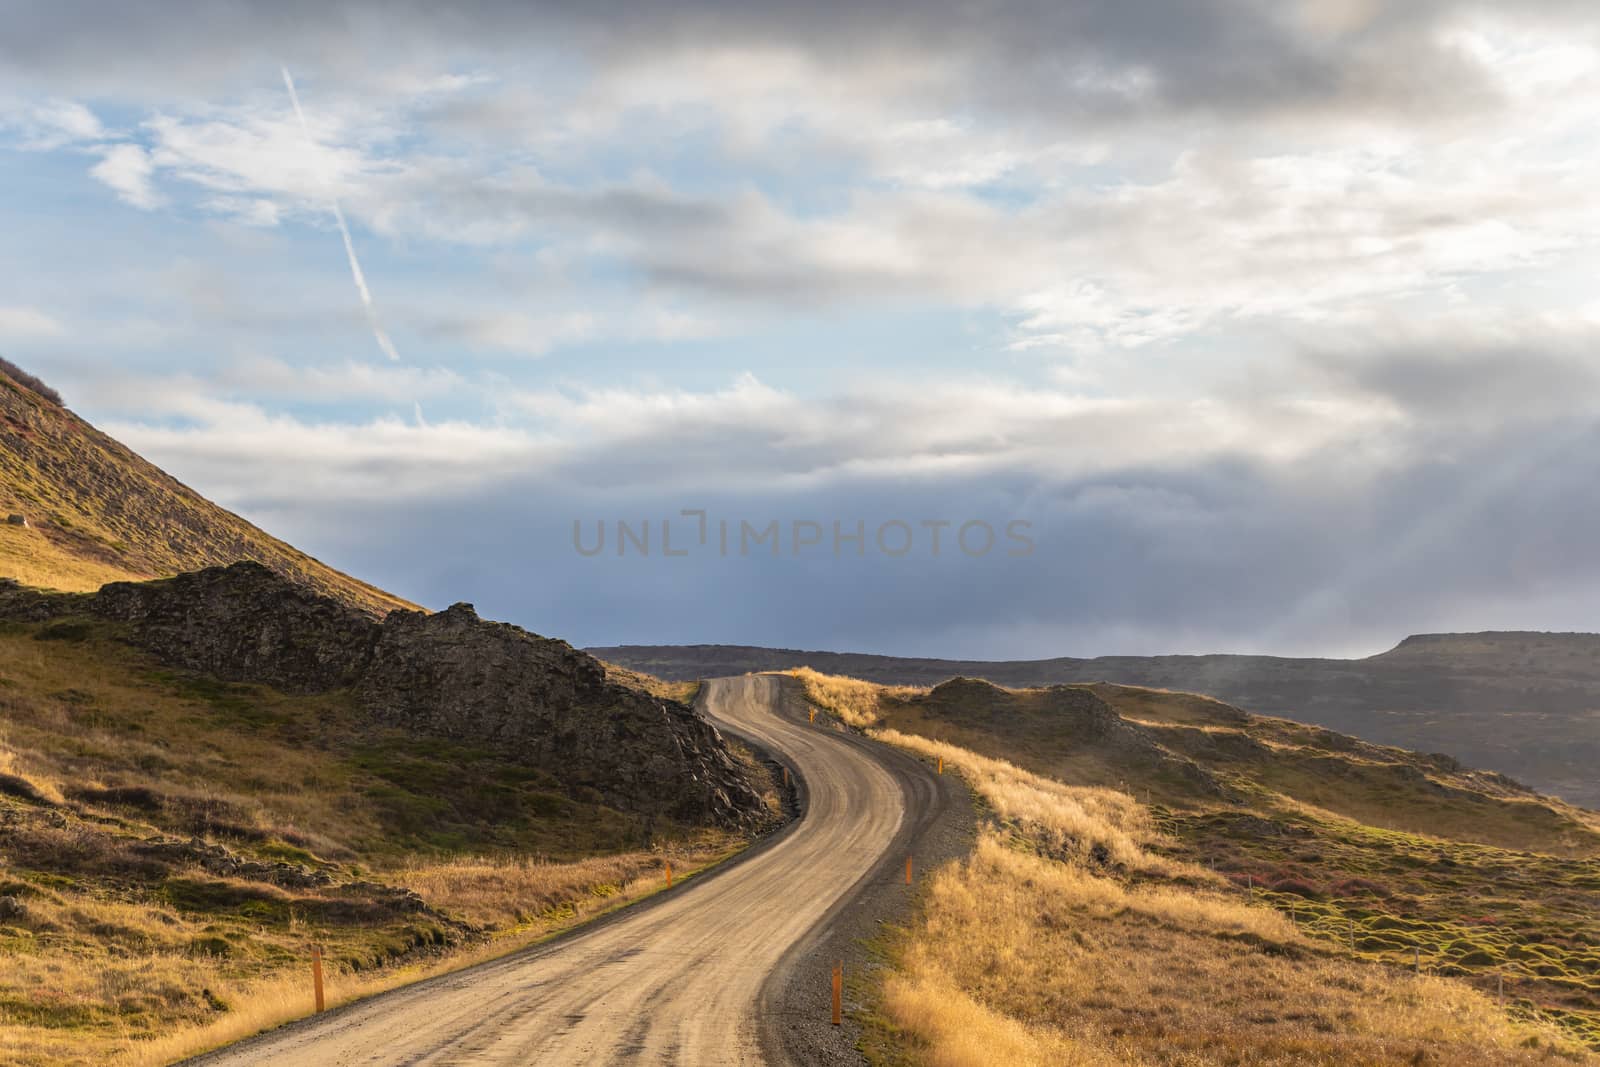 Roadtrip in Iceland dirt road in west iceland winding along atlantic coast during beautiful sunshine by MXW_Stock